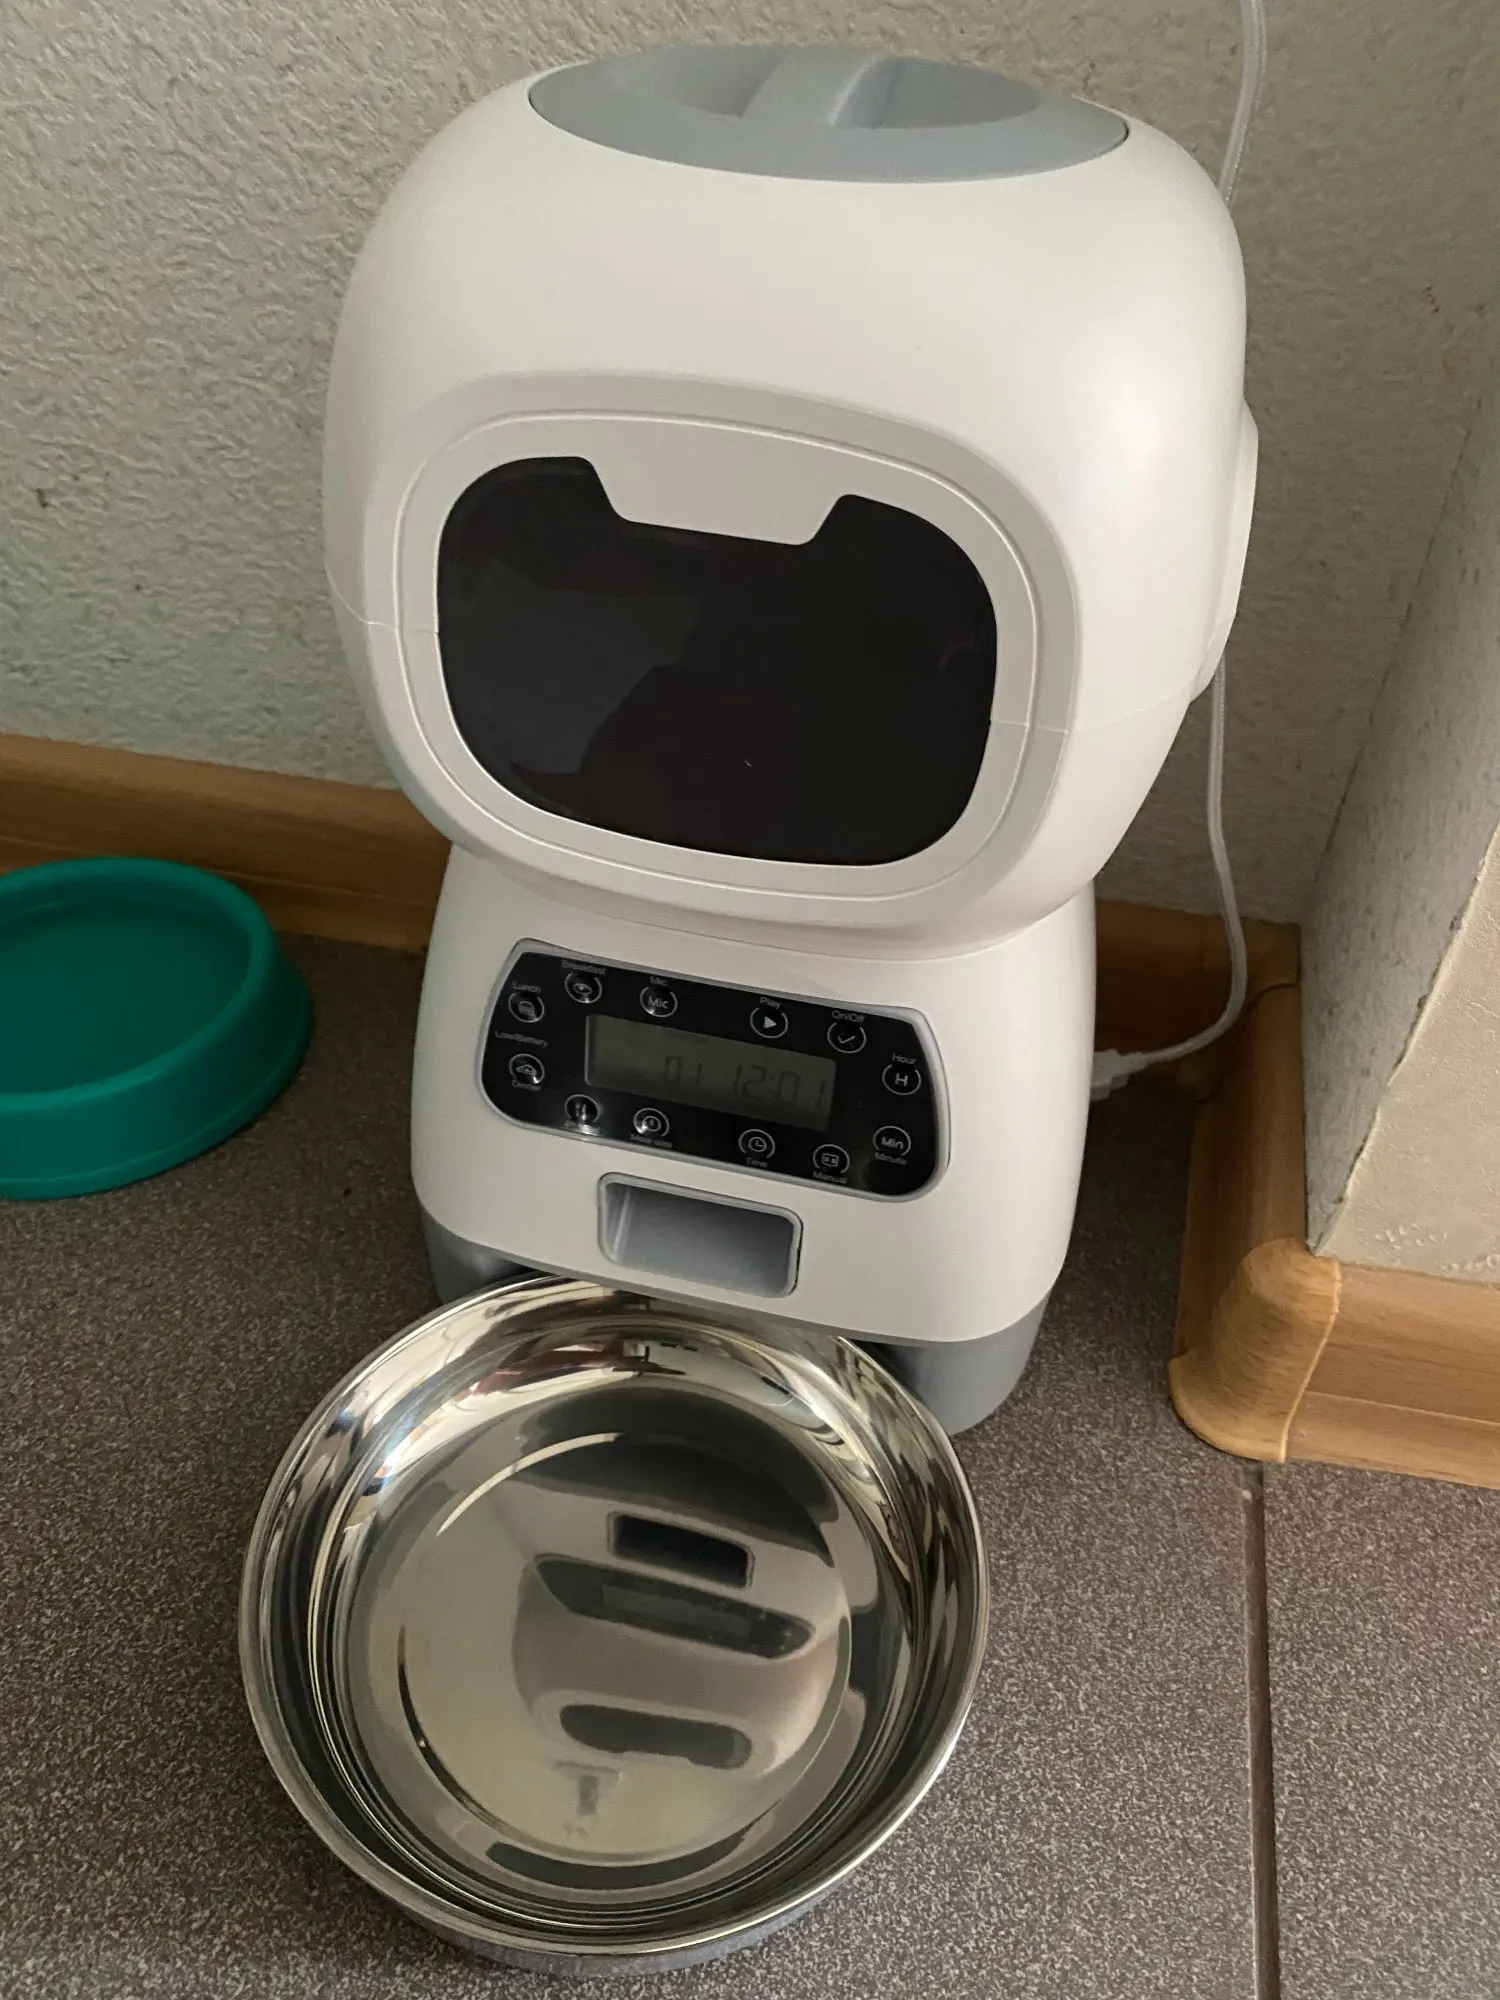 New Automatic Smart Pet Feeder and Slow Dispenser with Fixed Time and Amount Settings - Ideal for Cat and Dog Travel Supplies photo review